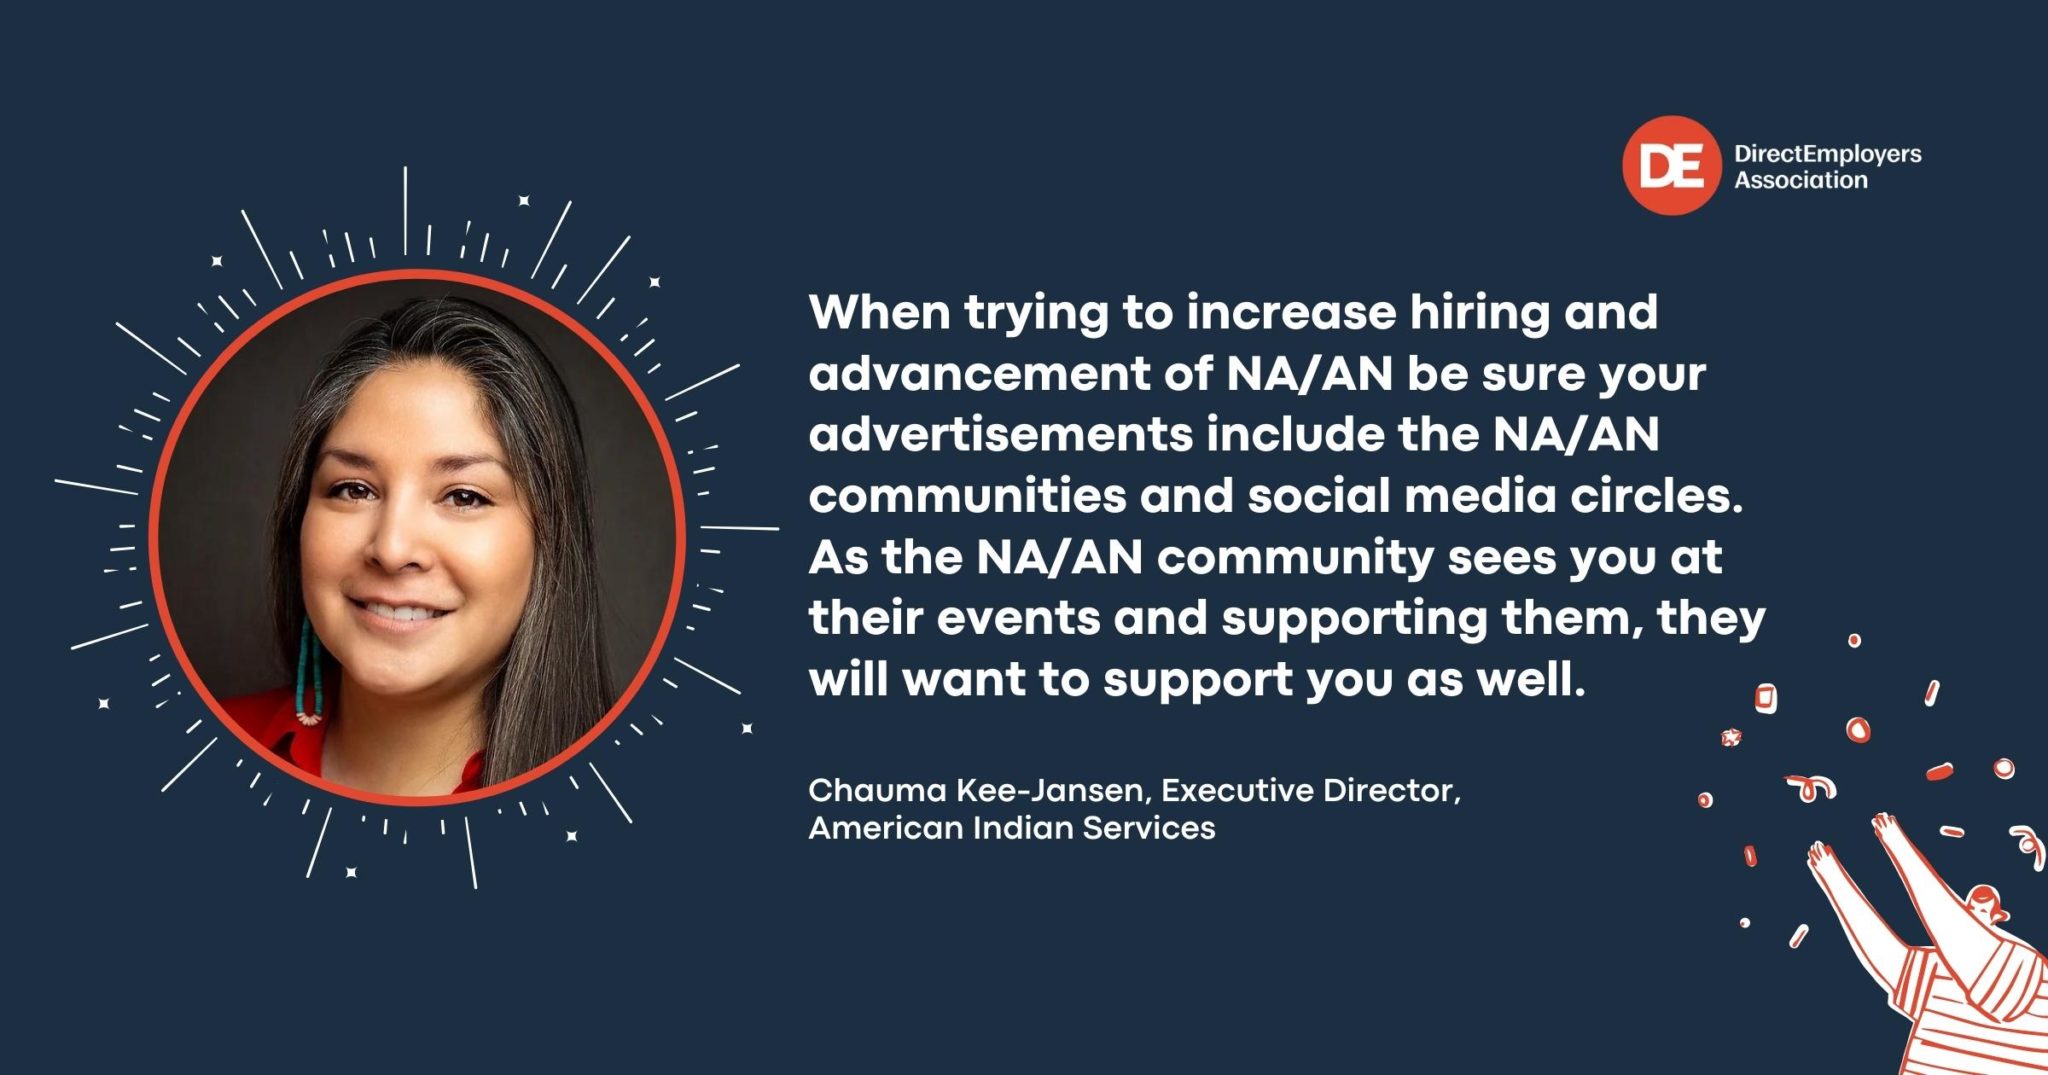 Top right: Direct Employers Association with logo to the left that is white capital letters DE inside a red circle; On Left red outlined circle with smiling Native American woman,  Chauma Kee-Jansen, Executive Director, American Indian Services and her quote on right in white text with navy blue background "When trying to increase hiring and advancement of NA/AN be sure your advertisements include NA/AN communities and social media circles. As the NA/AN community sees you at their events and supporting them, they will want to support you as well." Bottom right white/red clip art figure in striped shirt throwing confetti into the air. 